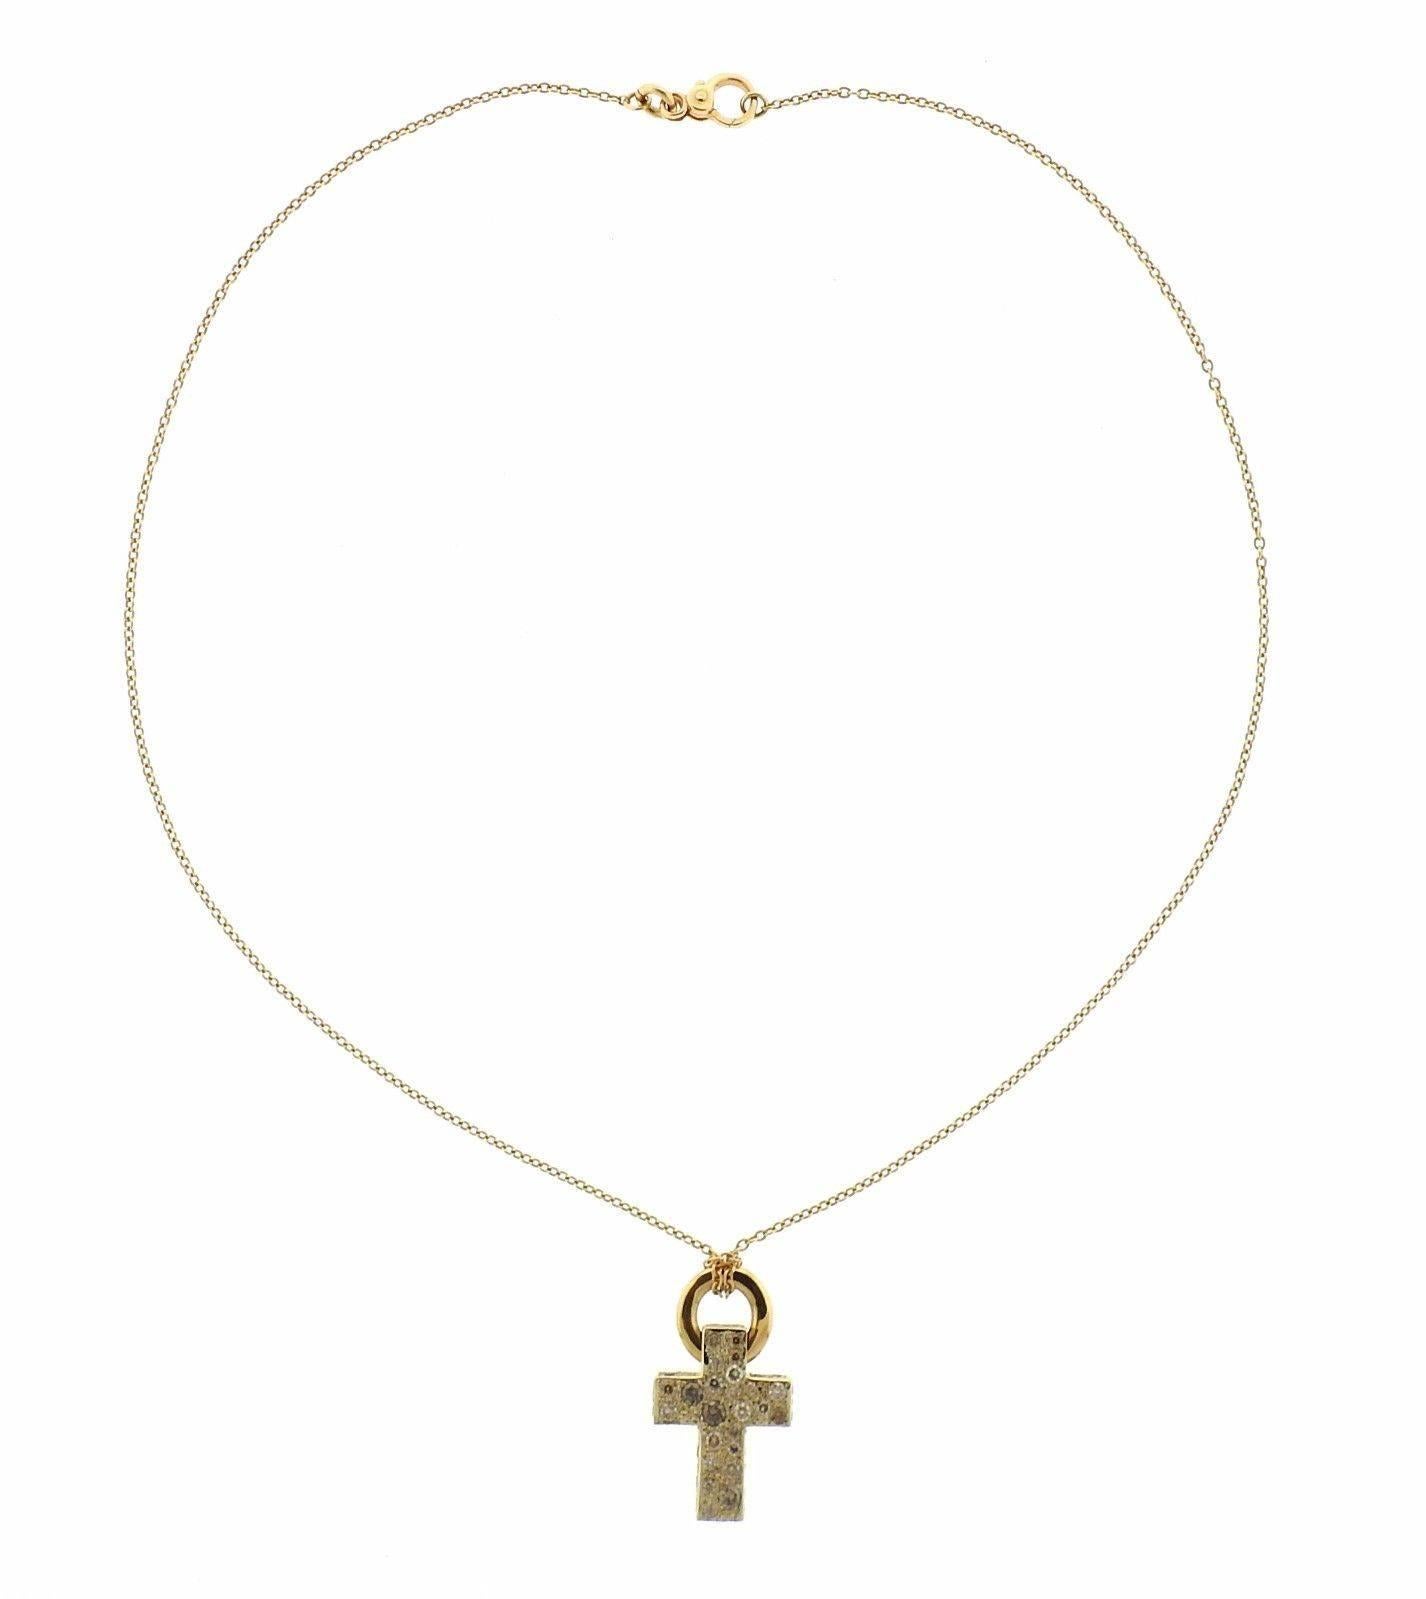 An 18k yellow gold cross pendant necklace set with approximately 1 carat of fancy color diamonds.  The necklace is 16